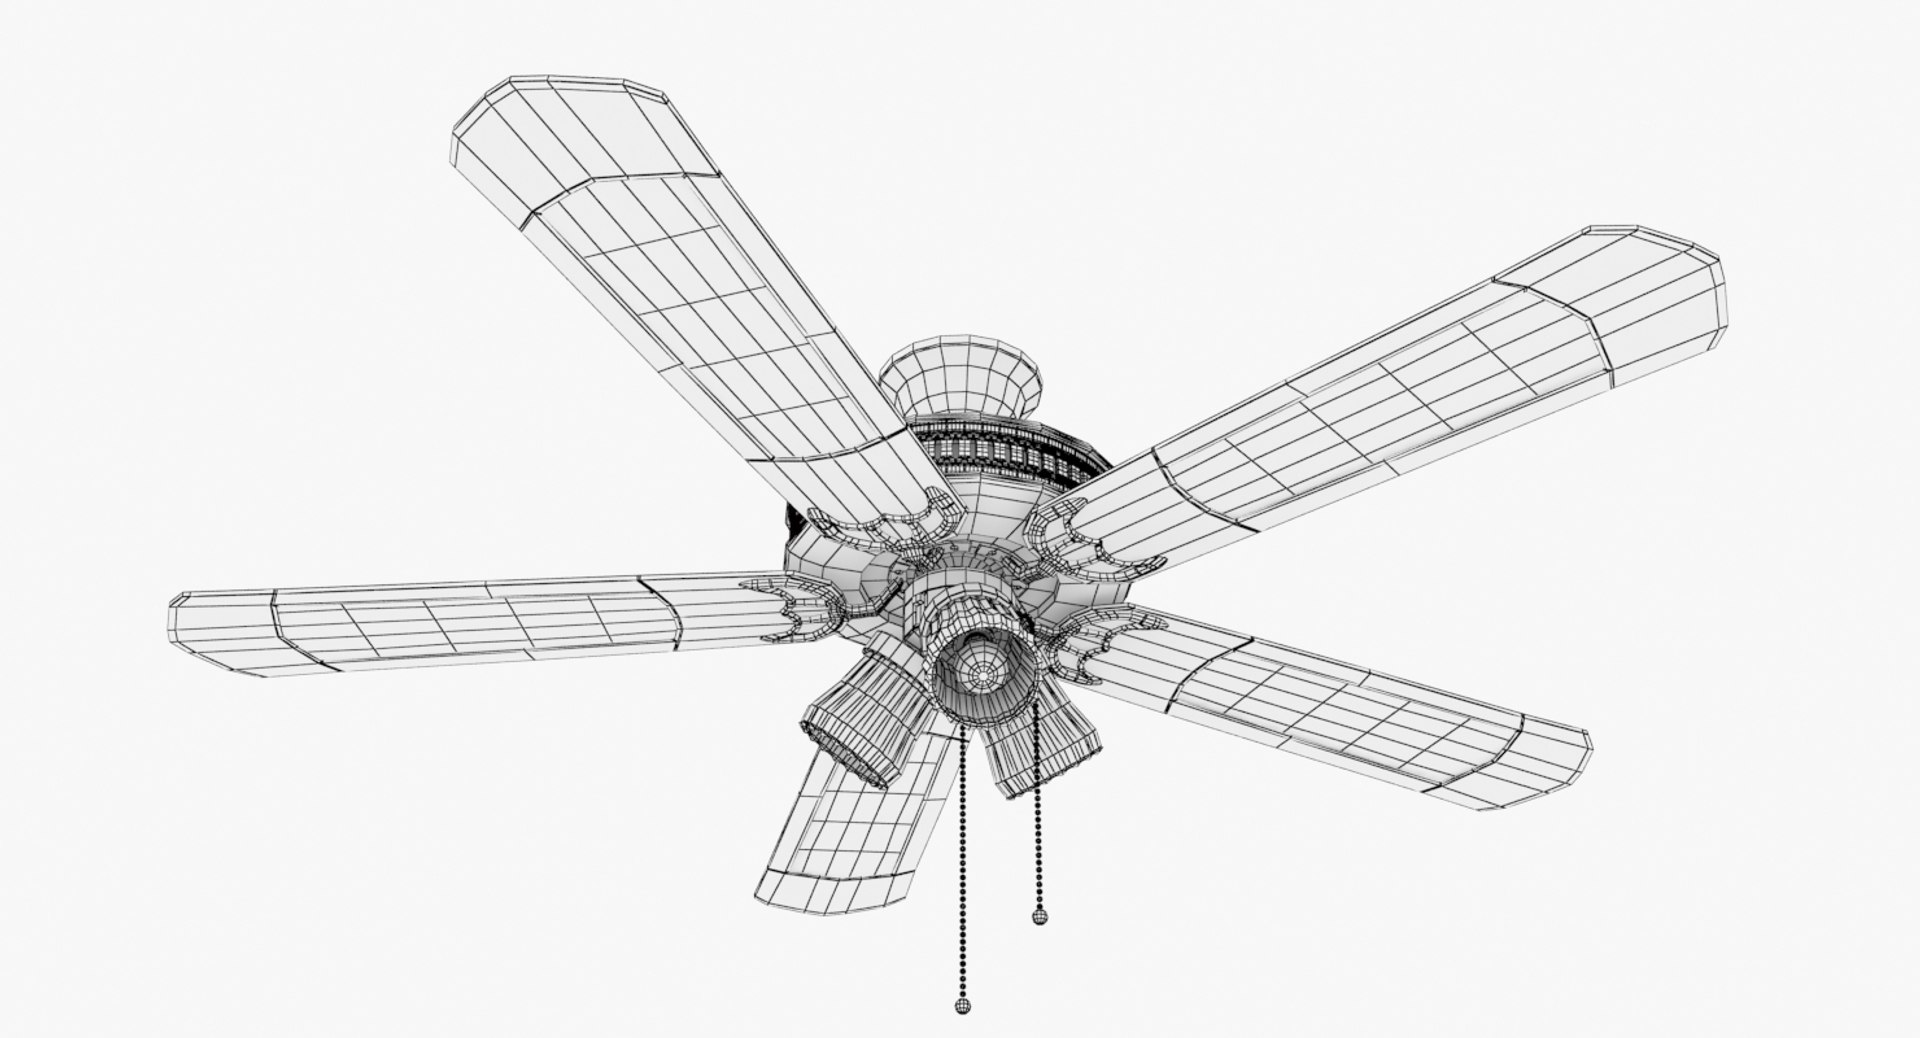 How to DRAW a CEILING FAN Easy Step by Step - YouTube